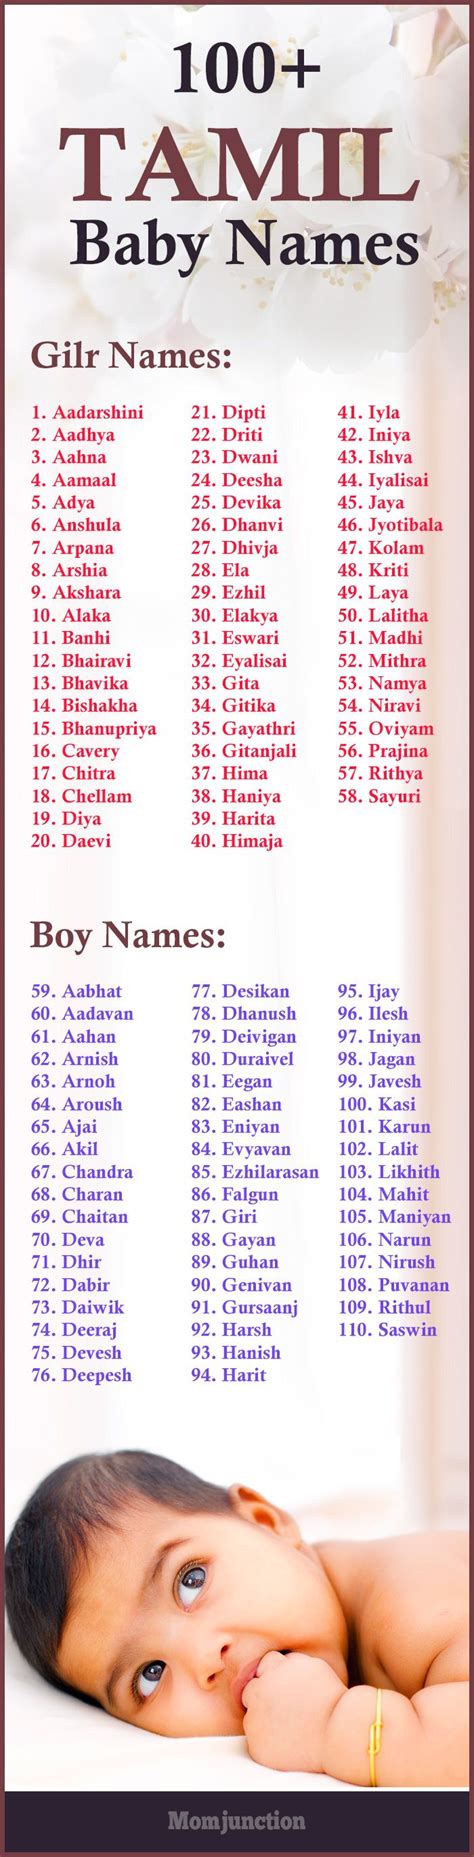 Need to translate குட்டி (kuṭṭi) from tamil? 135 Modern Tamil Baby Names For Girls And Boys | Tamil ...